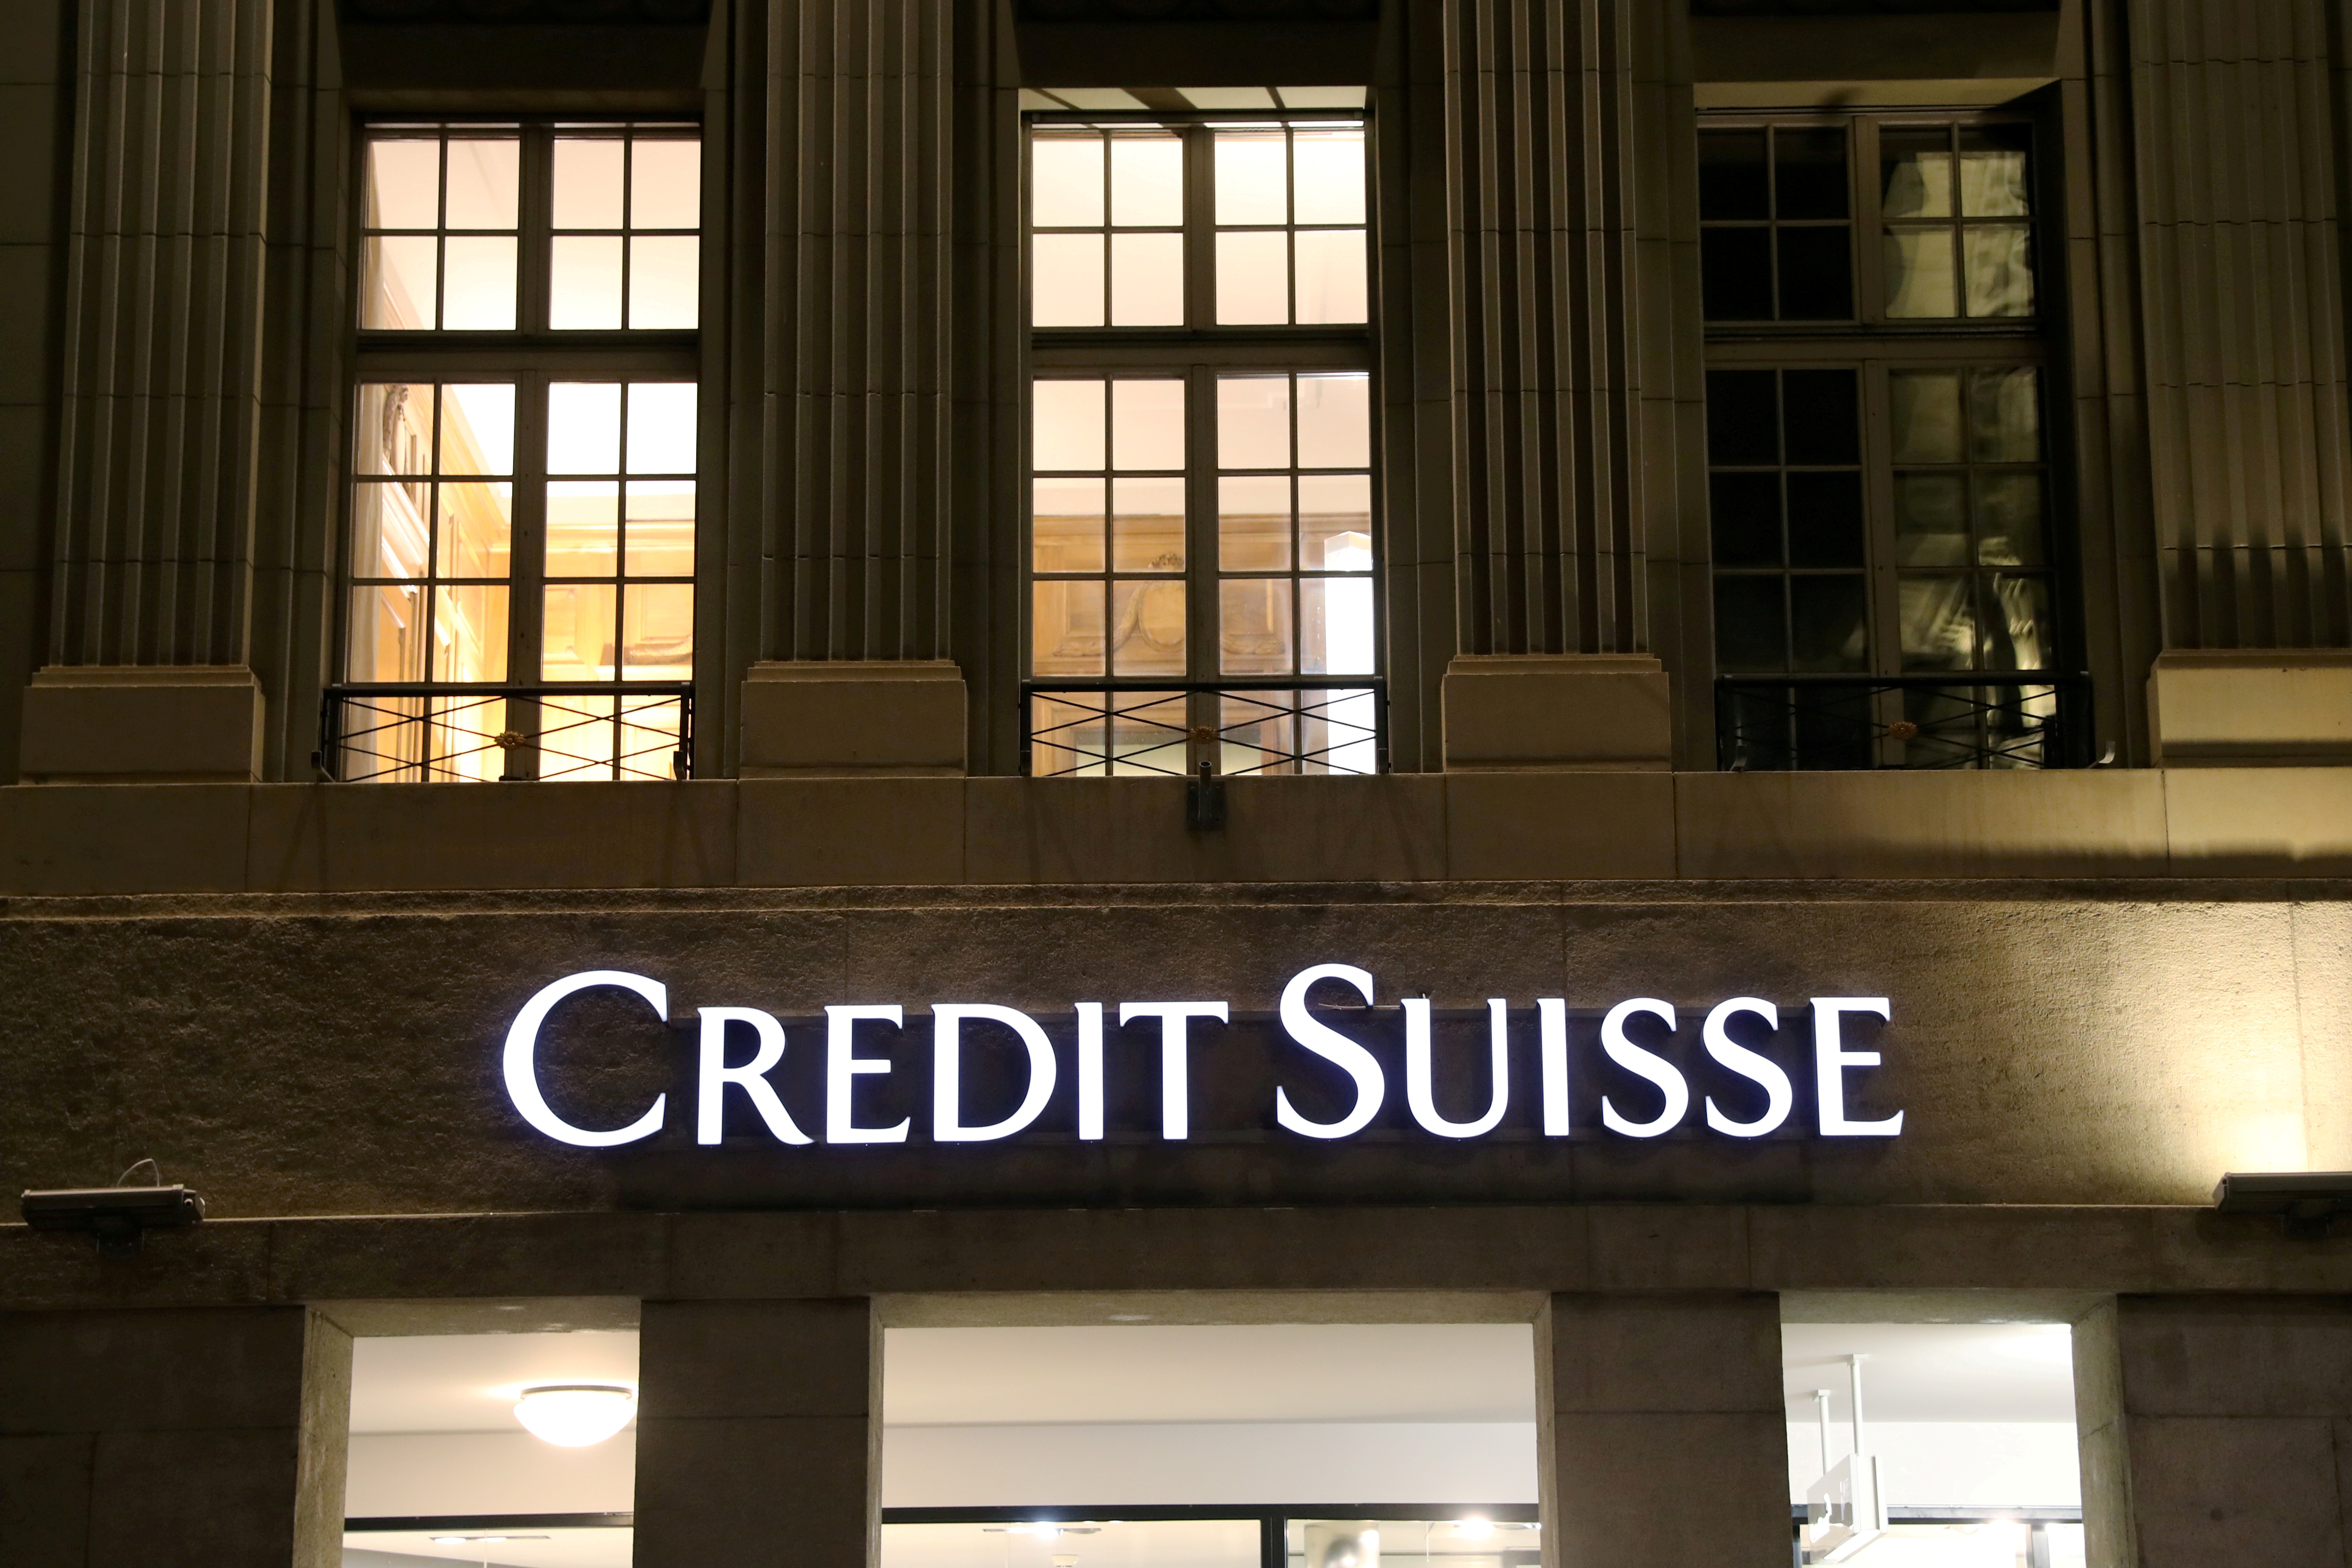 The logo of Swiss bank Credit Suisse is seen at a branch office in Bern, Switzerland October 28, 2020. REUTERS/Arnd Wiegmann